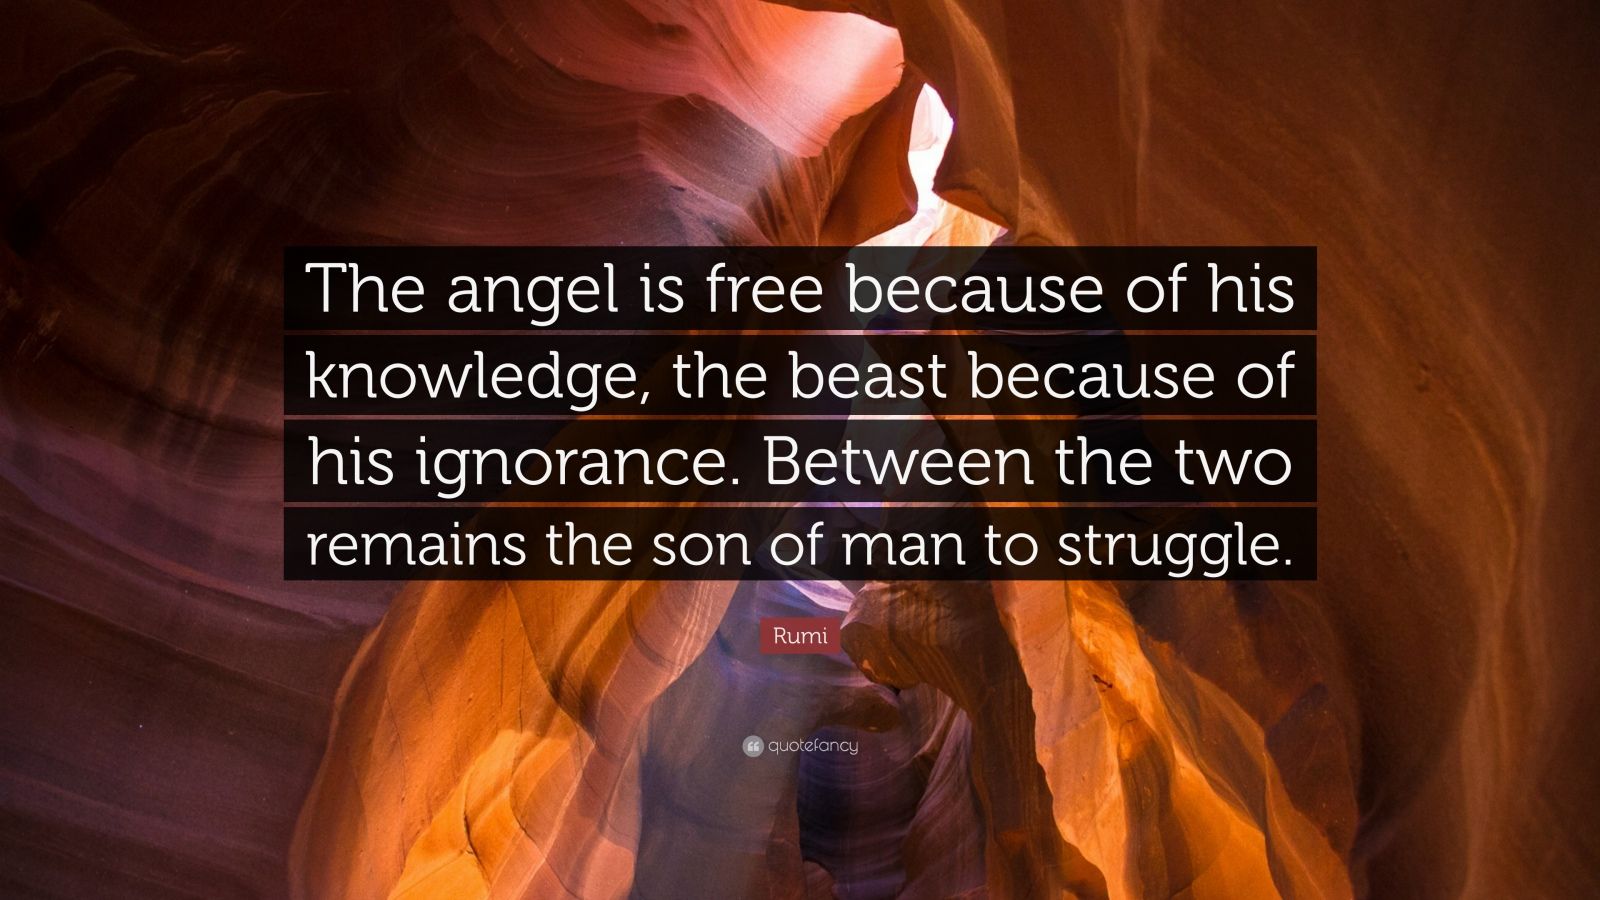 Rumi Quote “The angel is free because of his knowledge the beast because